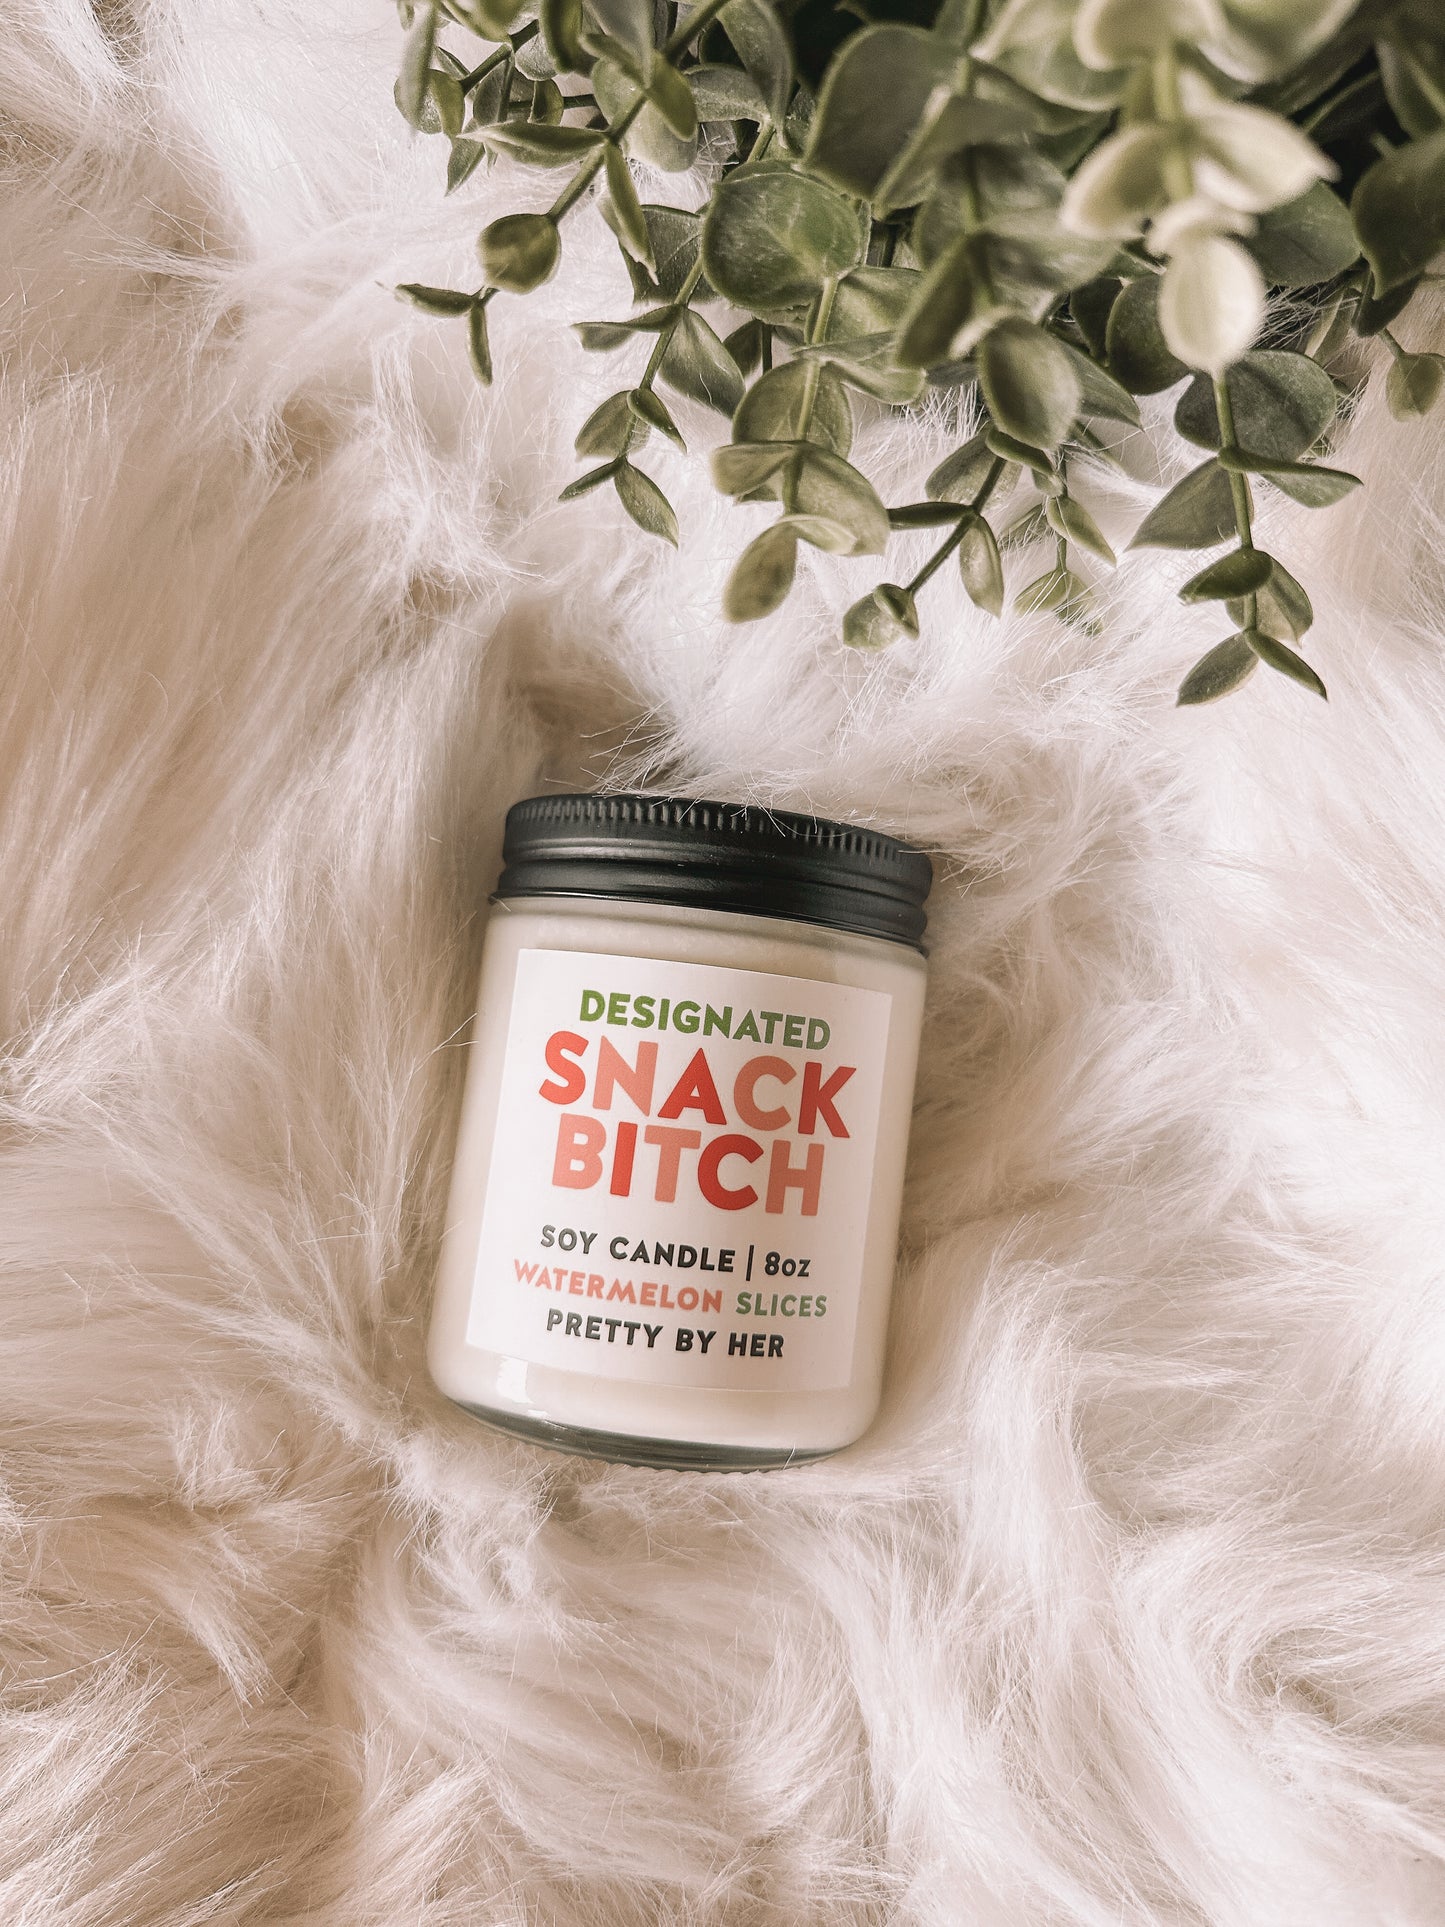 Pretty By Her Soy Candle - Designated Snack Bitch